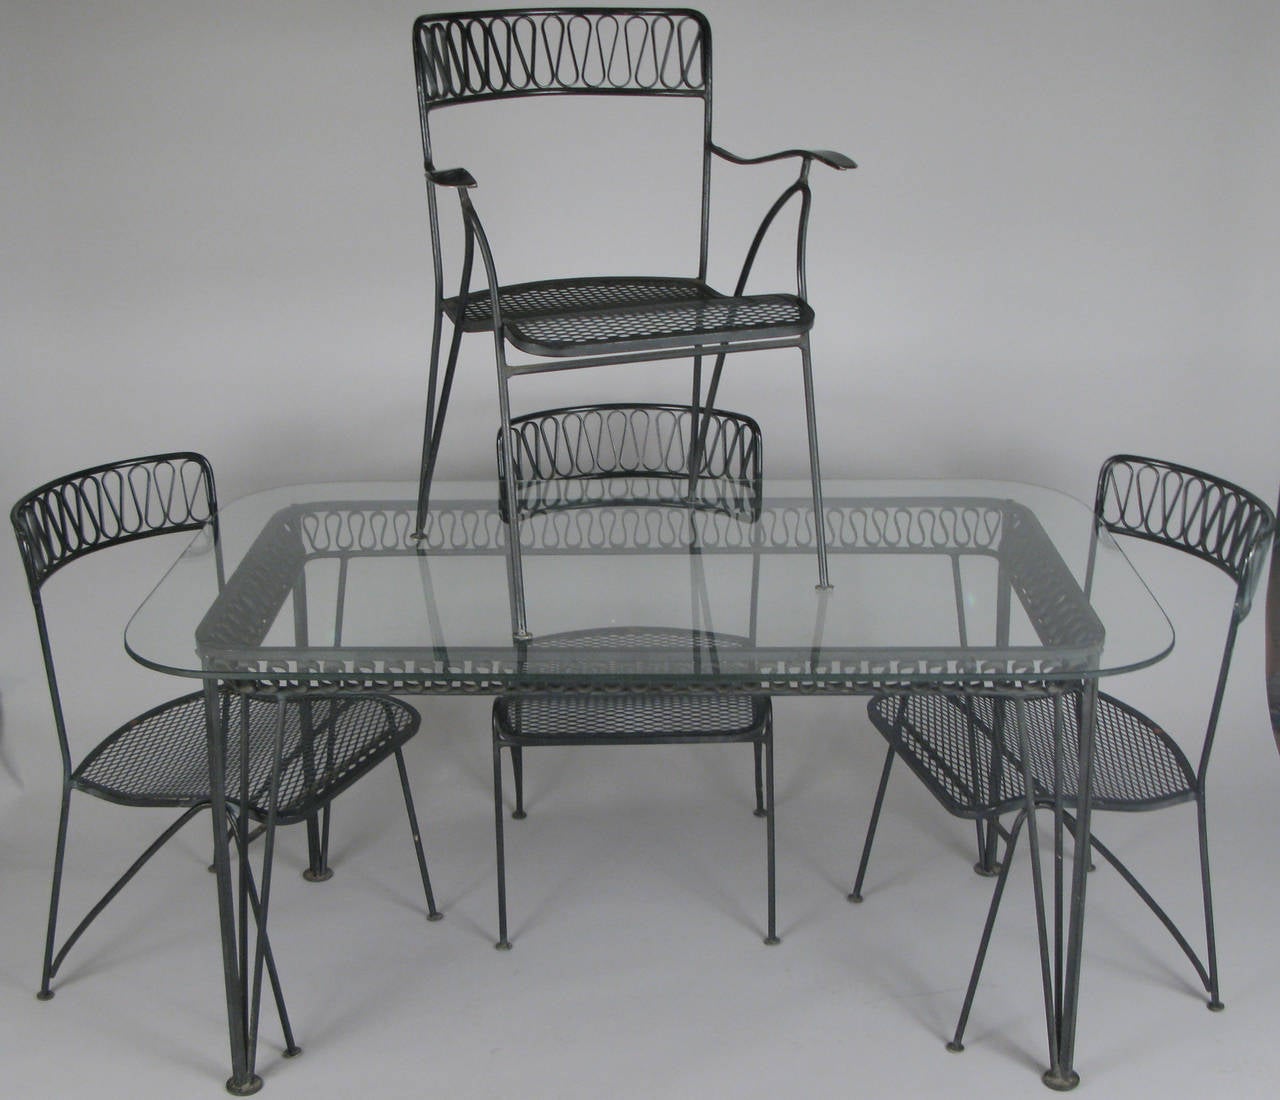 A Classic and iconic Salterini 'Ribbon' dining set from the 1950s, designed by Maurizio Tempestini. One of his best modern designs, with heavy and well made wrought iron frames and his dynamic wrought iron ribbon detail in the curved backs of the